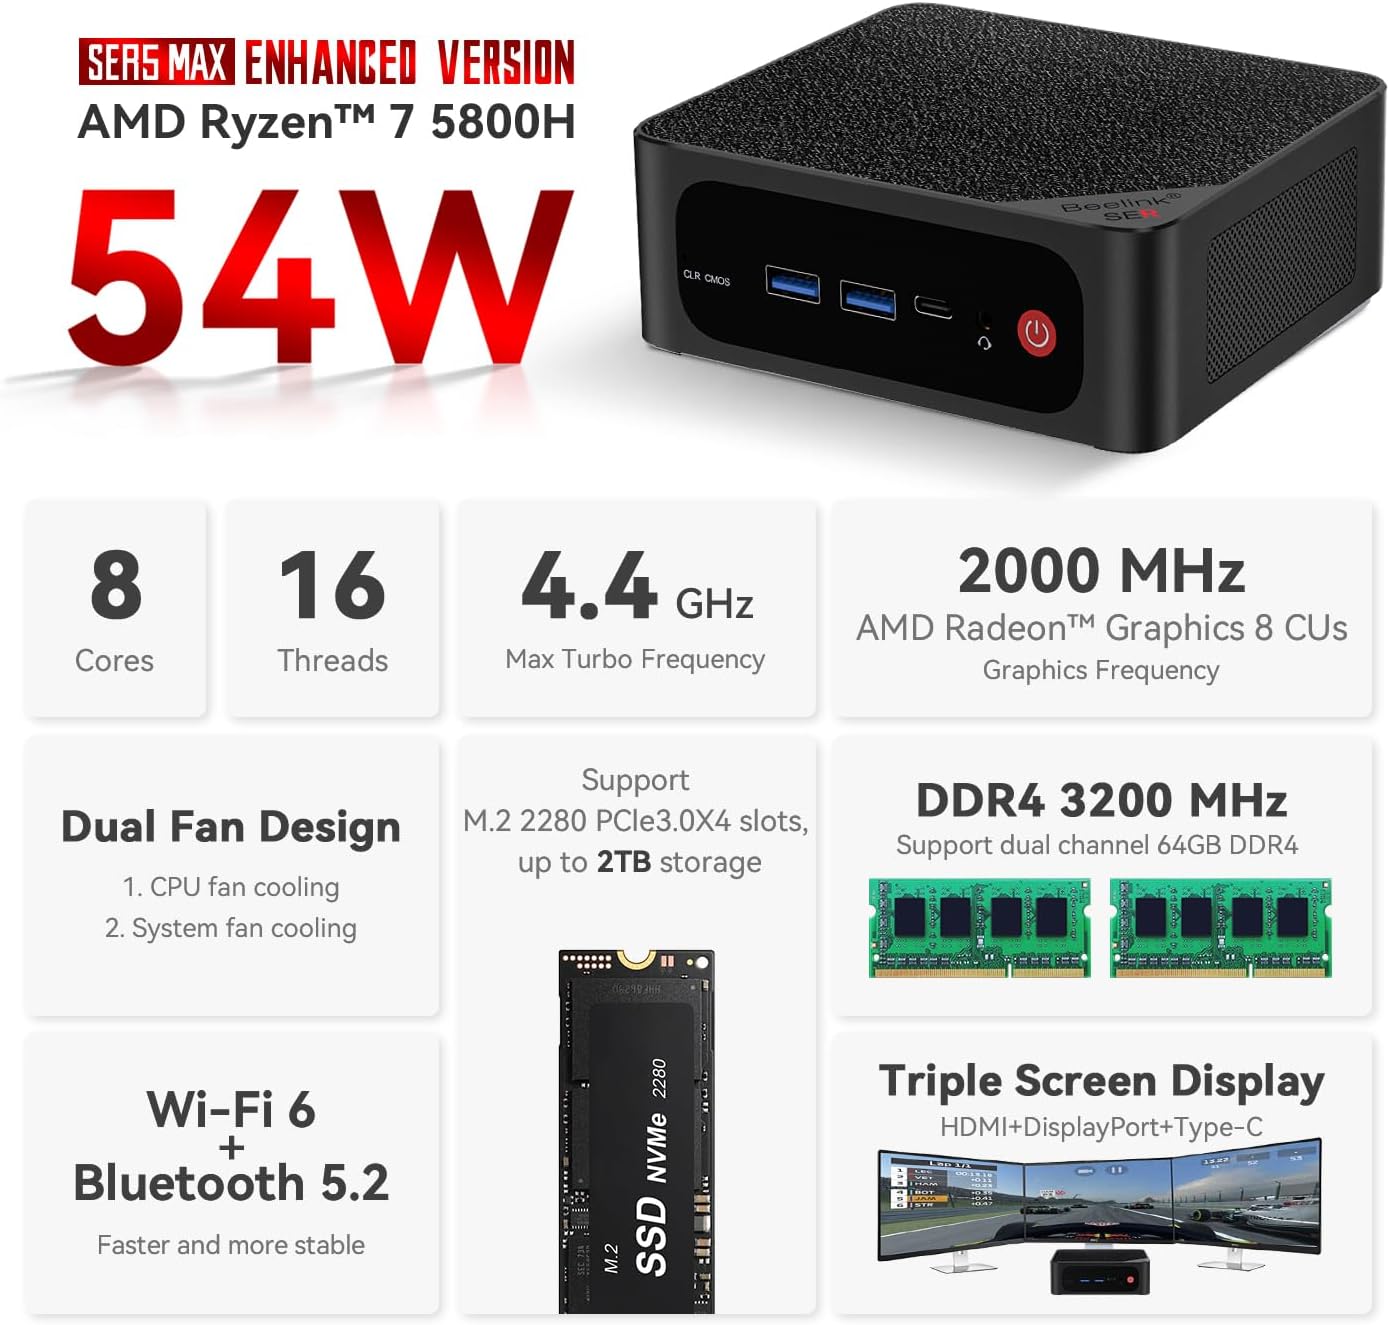 Beelink SER 5 MAX Mini Desktop Pc Computers, Ryzen 7 5800H 8 Cores Up to 4.4Ghz 32GB DDR4 500GB NVME SSD Radeon Graphics,with WiFi 6/BT-5.2/USB C/DP/HDMI,Support 2.5HDD/SSD